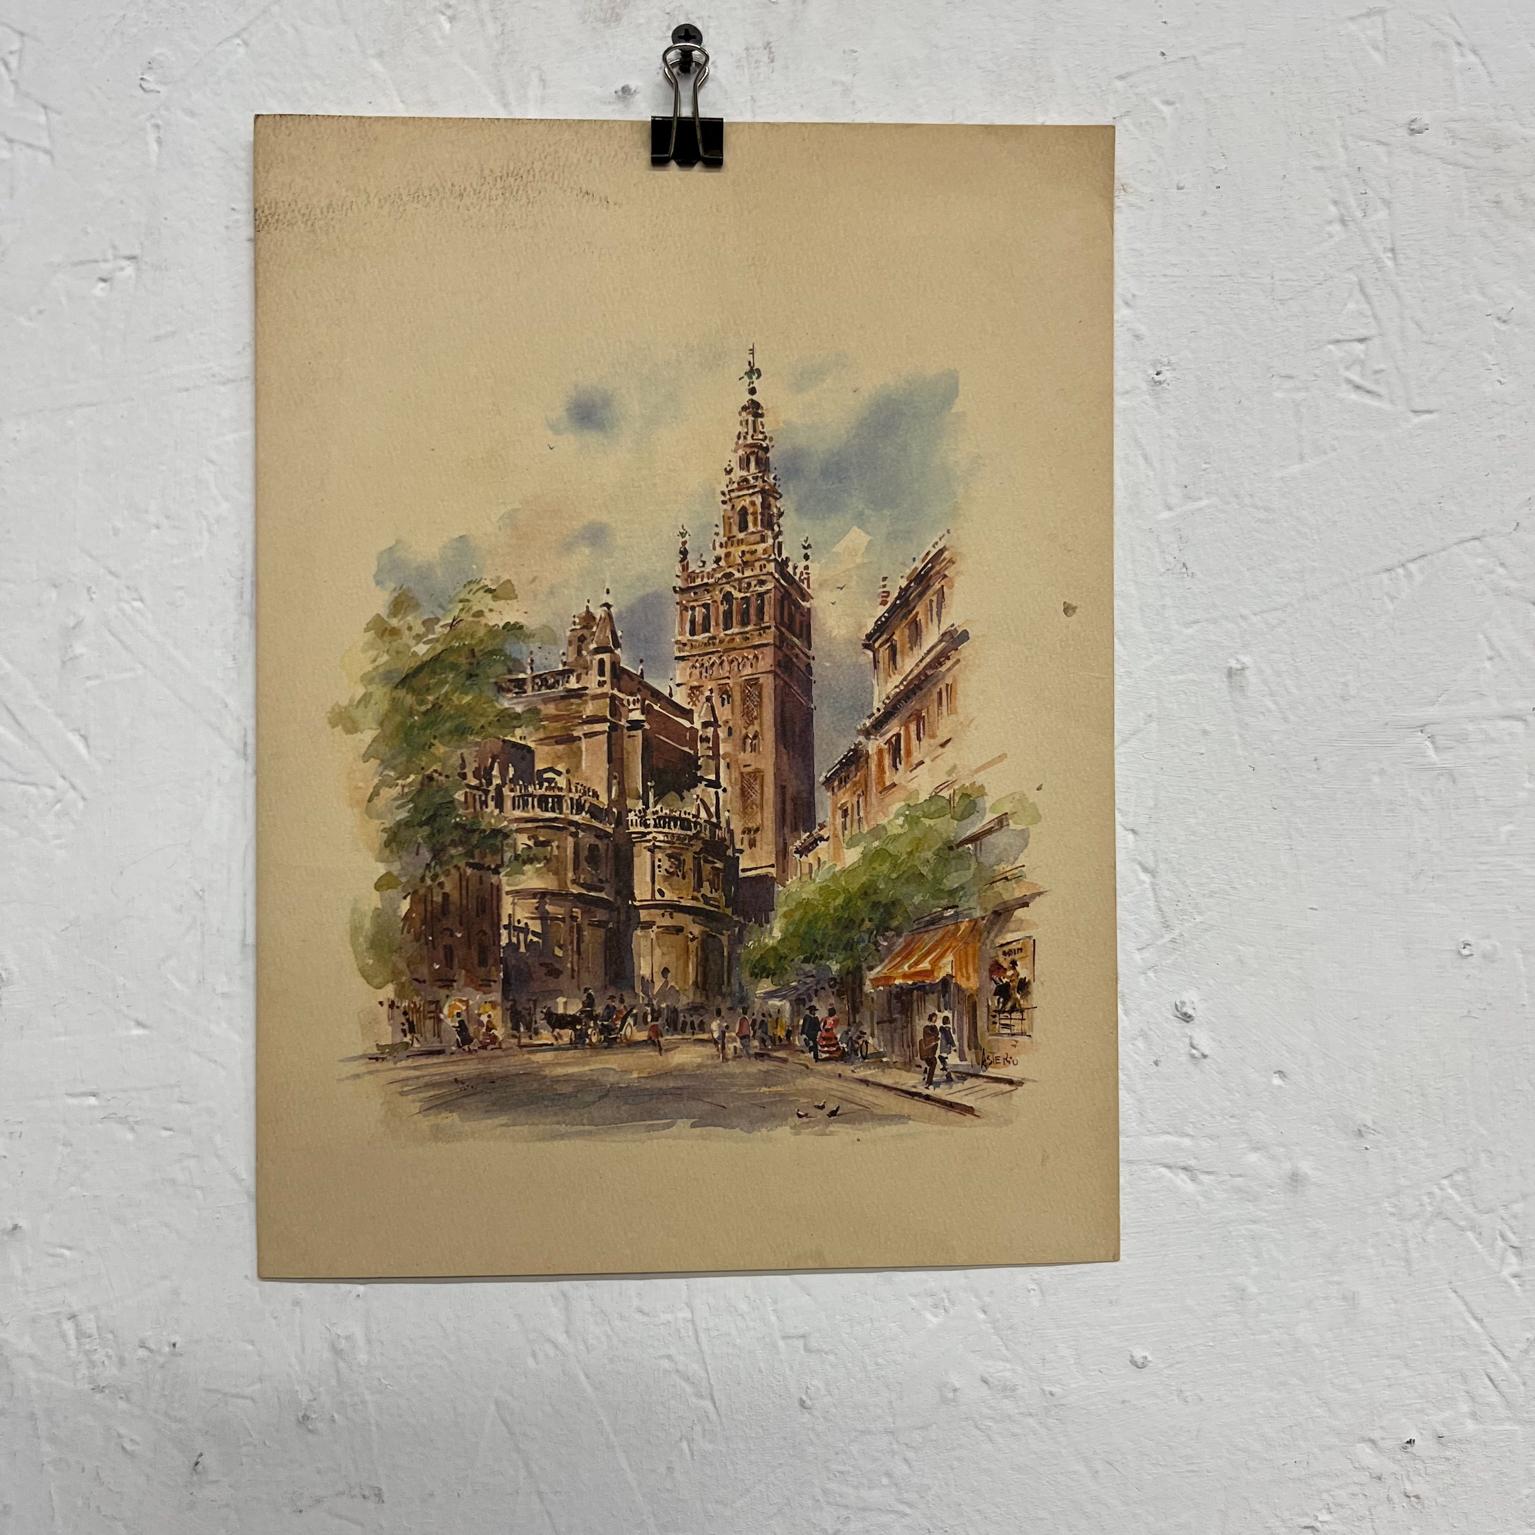 Asterio Pascolini 1960s impressionist vintage art Lithograph Sevilla Cathedral Spain
European Landmark
Measures: 9 x 12 
Preowned original unrestored condition vintage art. Unframed.
Refer to images.

     



